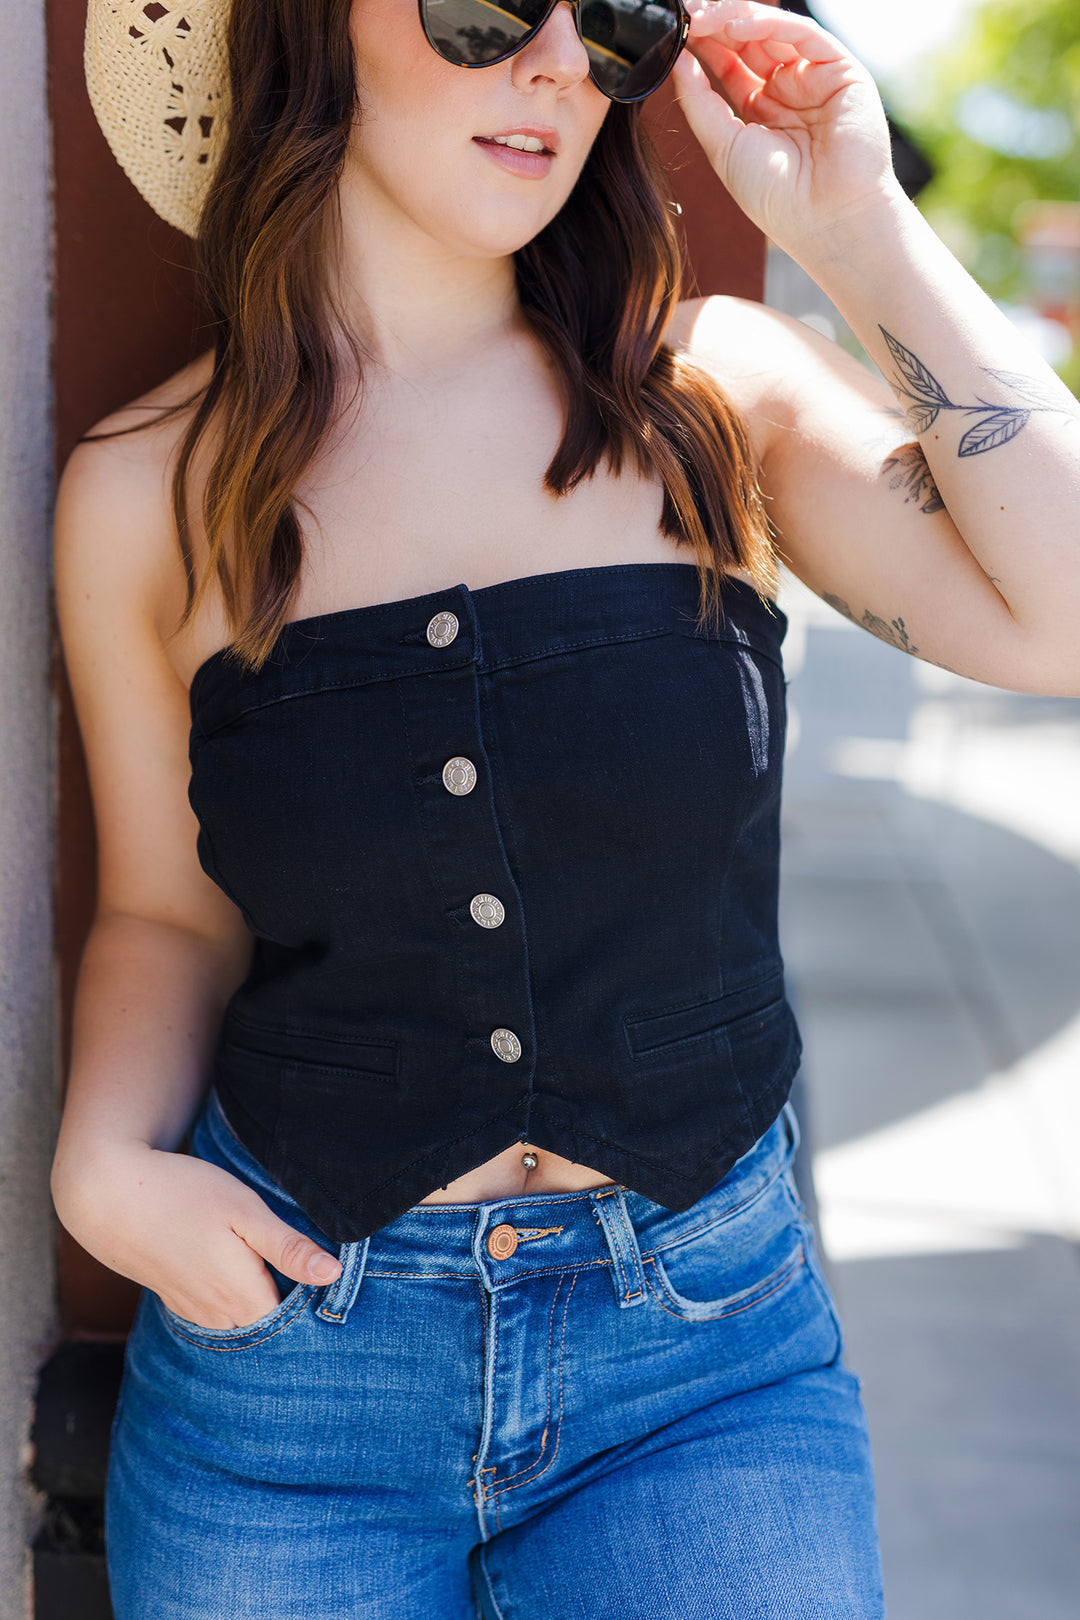 The Backstage Pass Strapless Denim Top